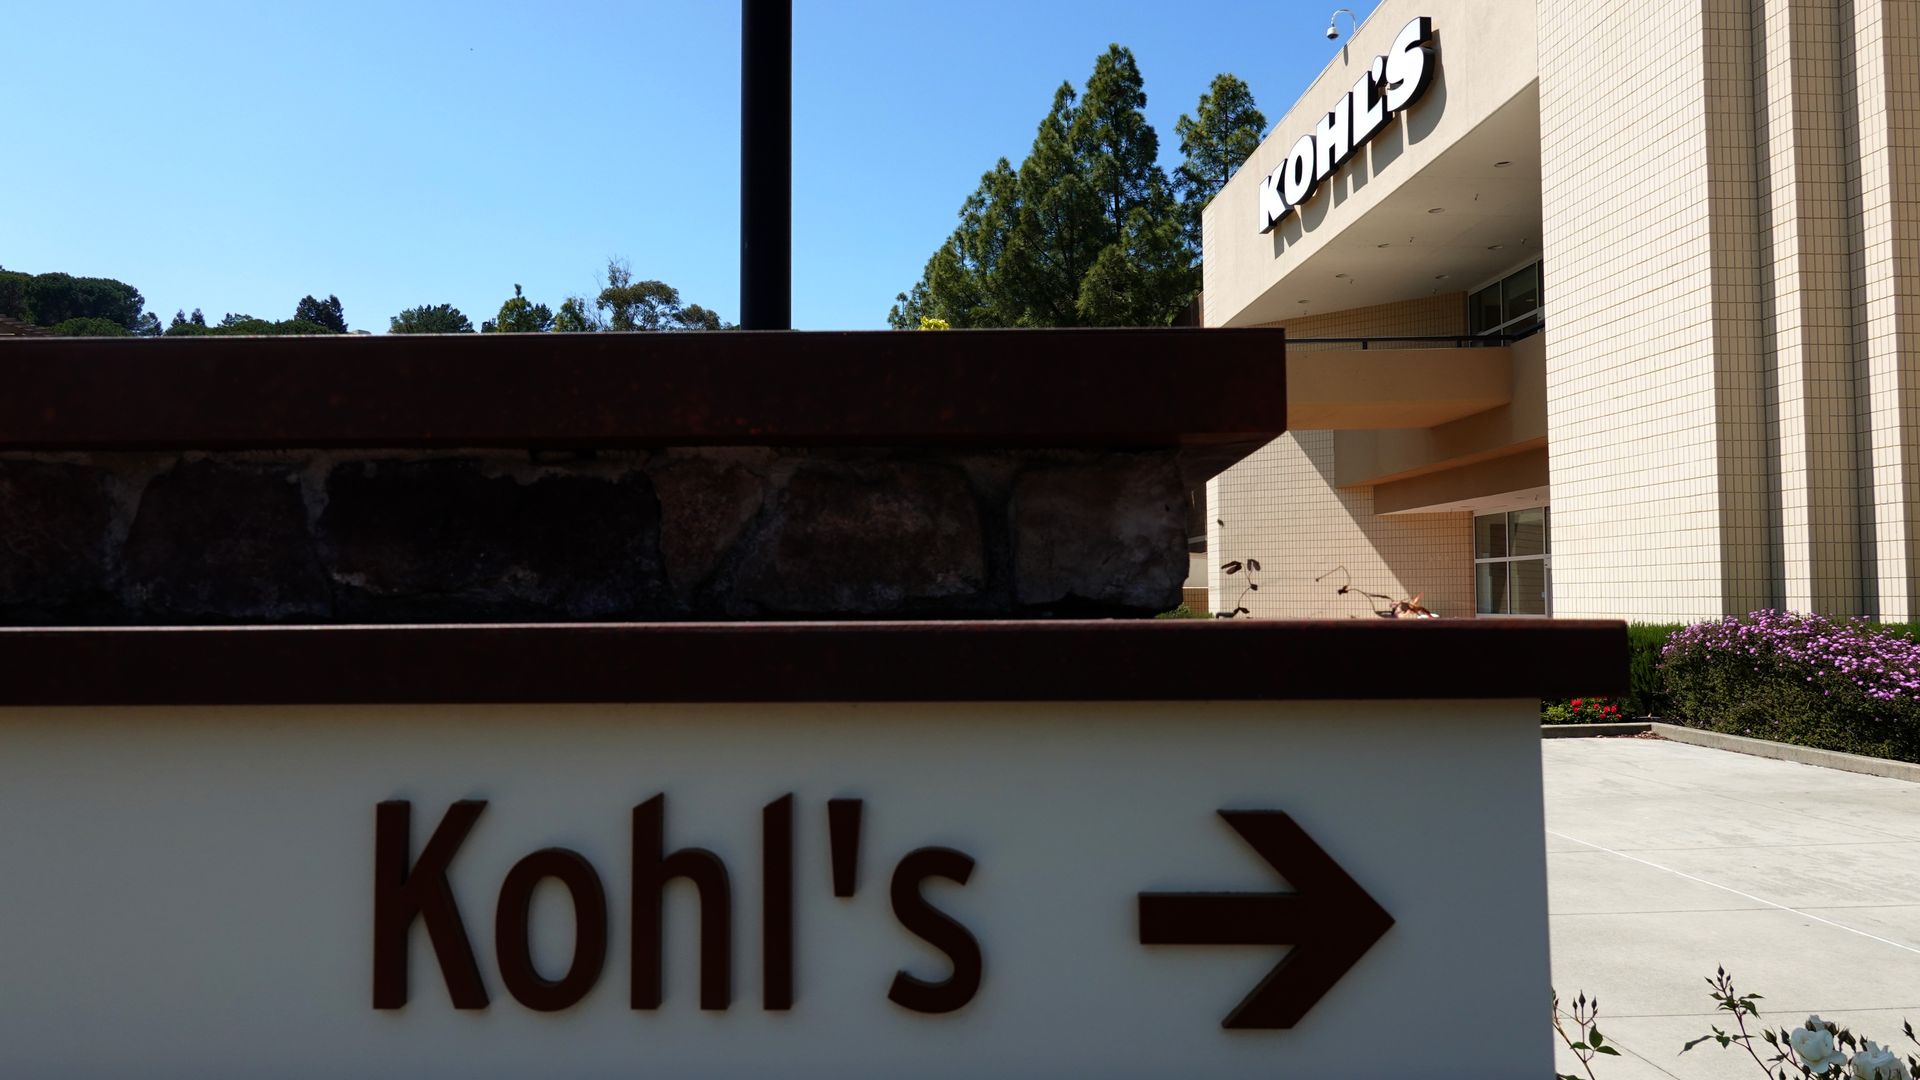 Sign that says Kohl's with an arrow pointing towards a Kohl's store